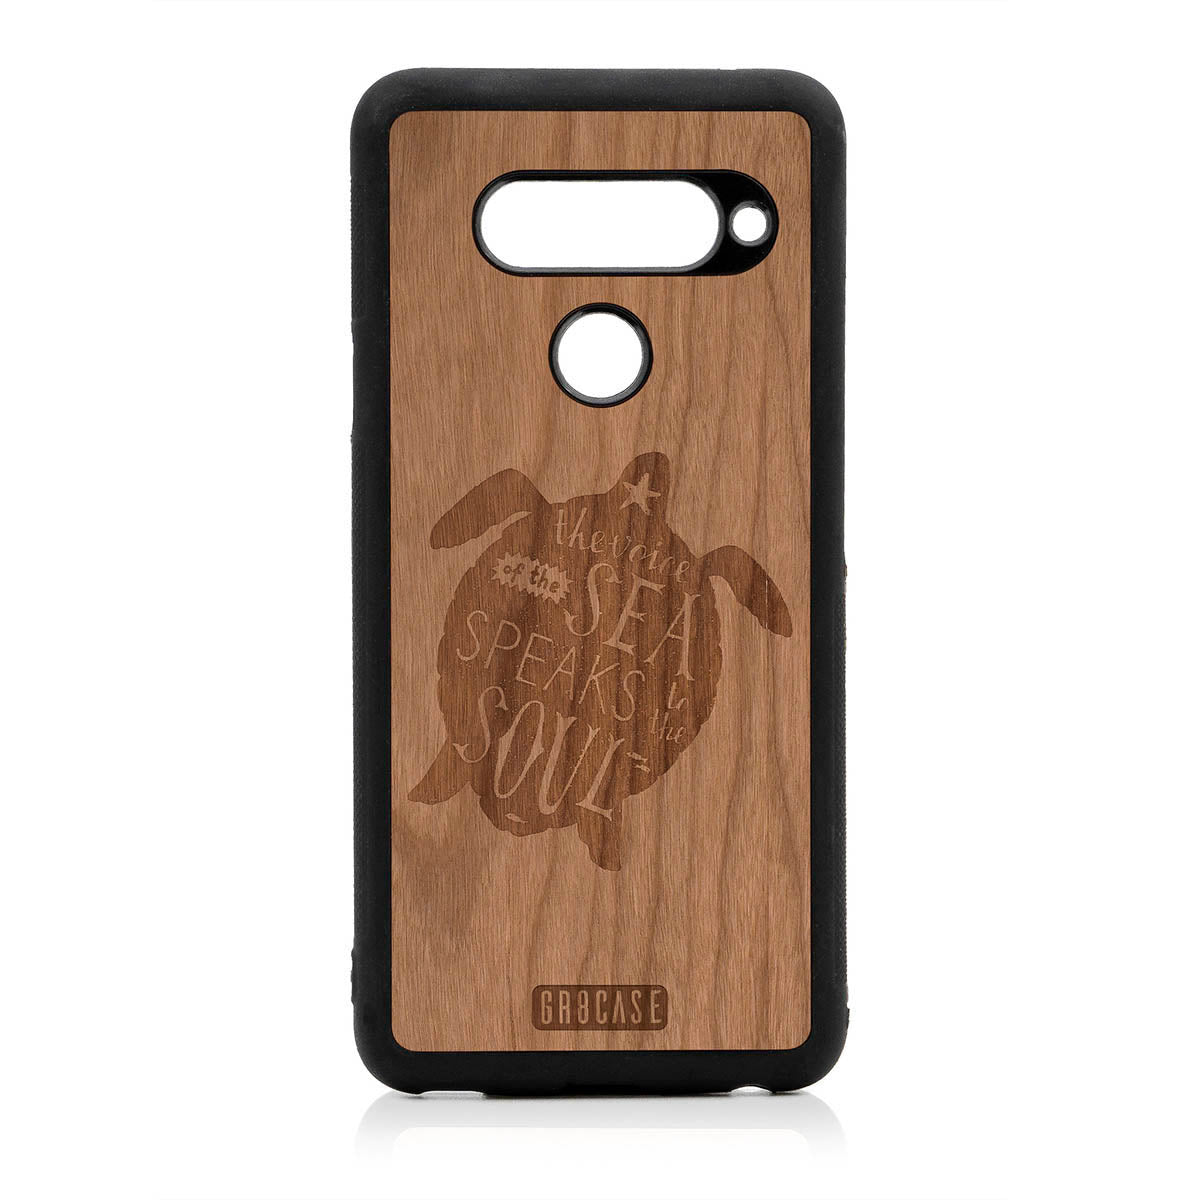 The Voice Of The Sea Speaks To The Soul (Turtle) Design Wood Case For LG V40